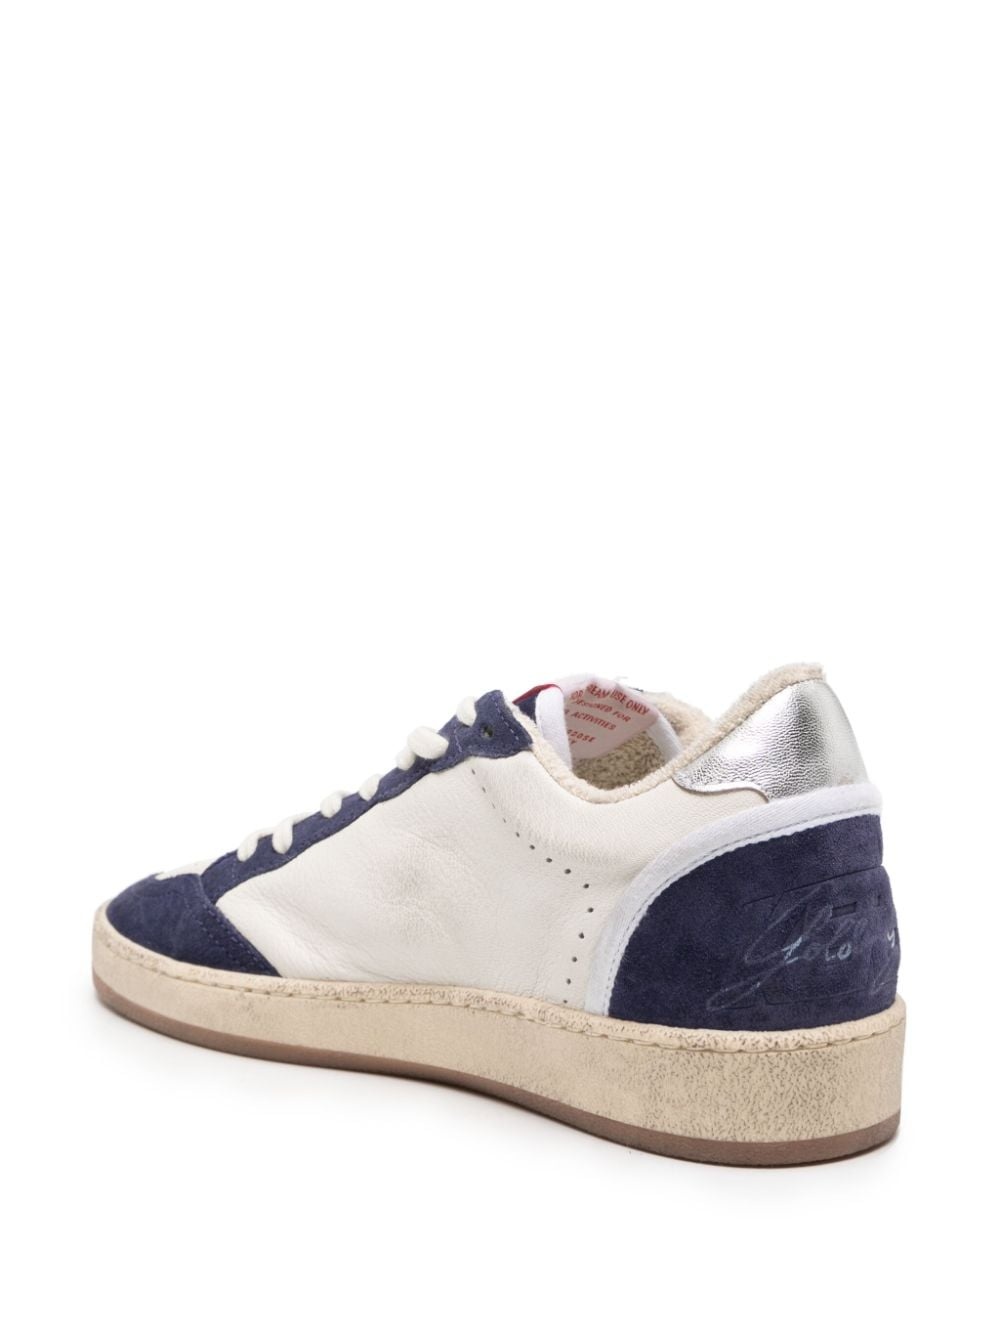 Ball Star leather sneakers - 3